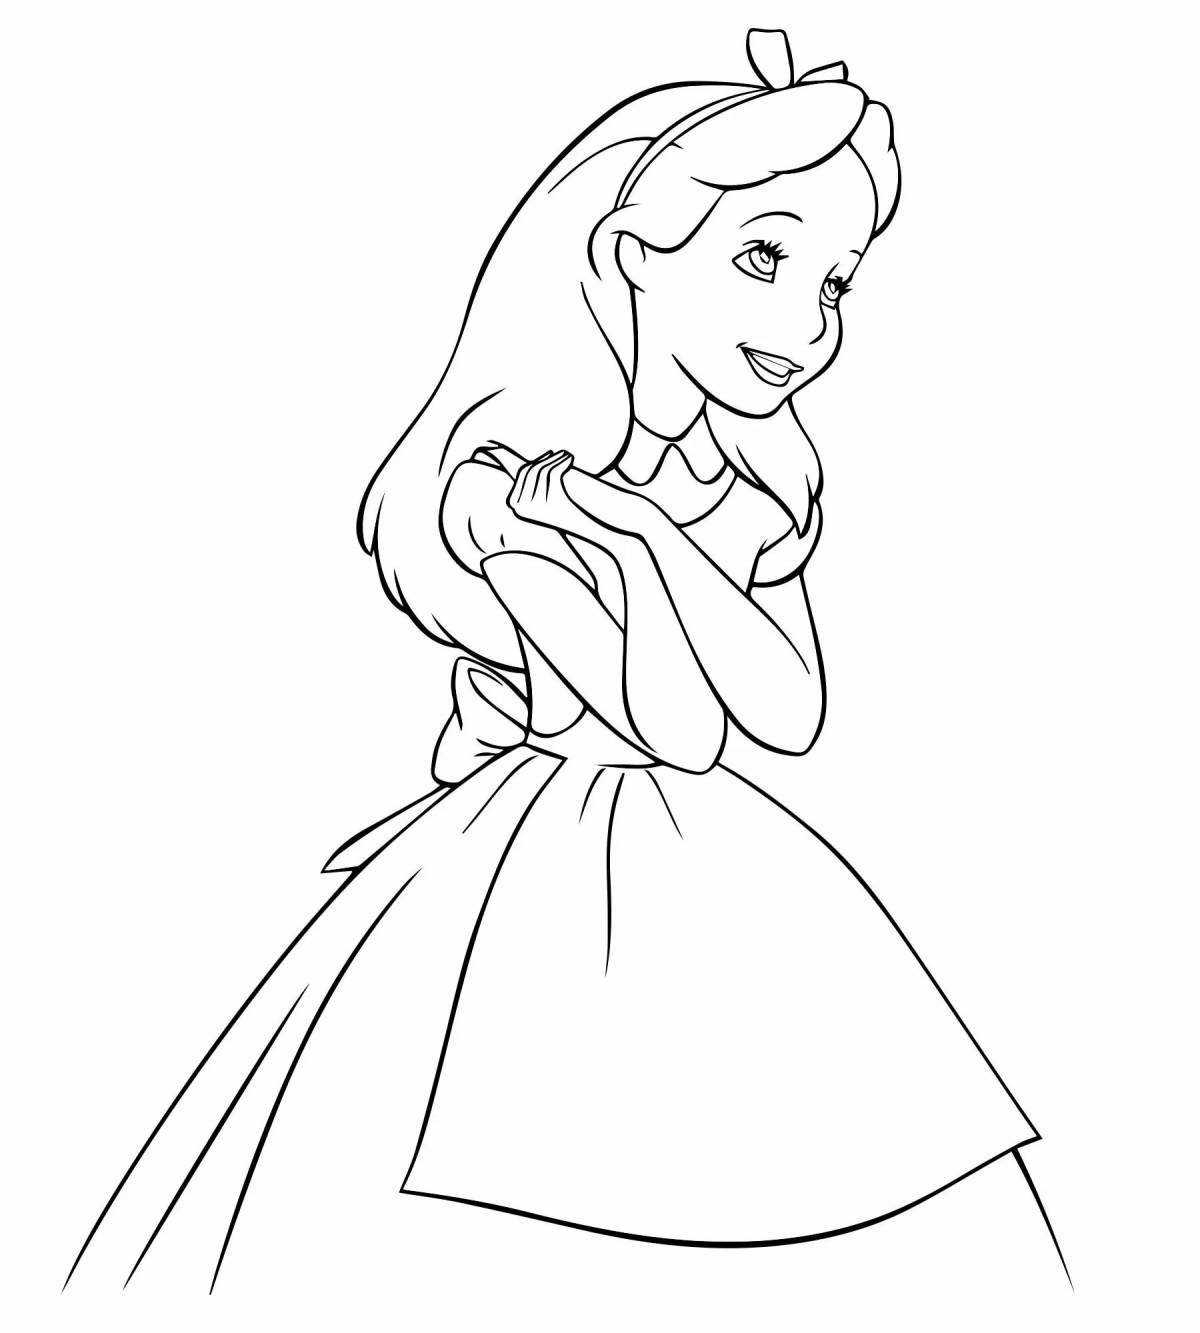 Shiny Alice coloring pages for girls